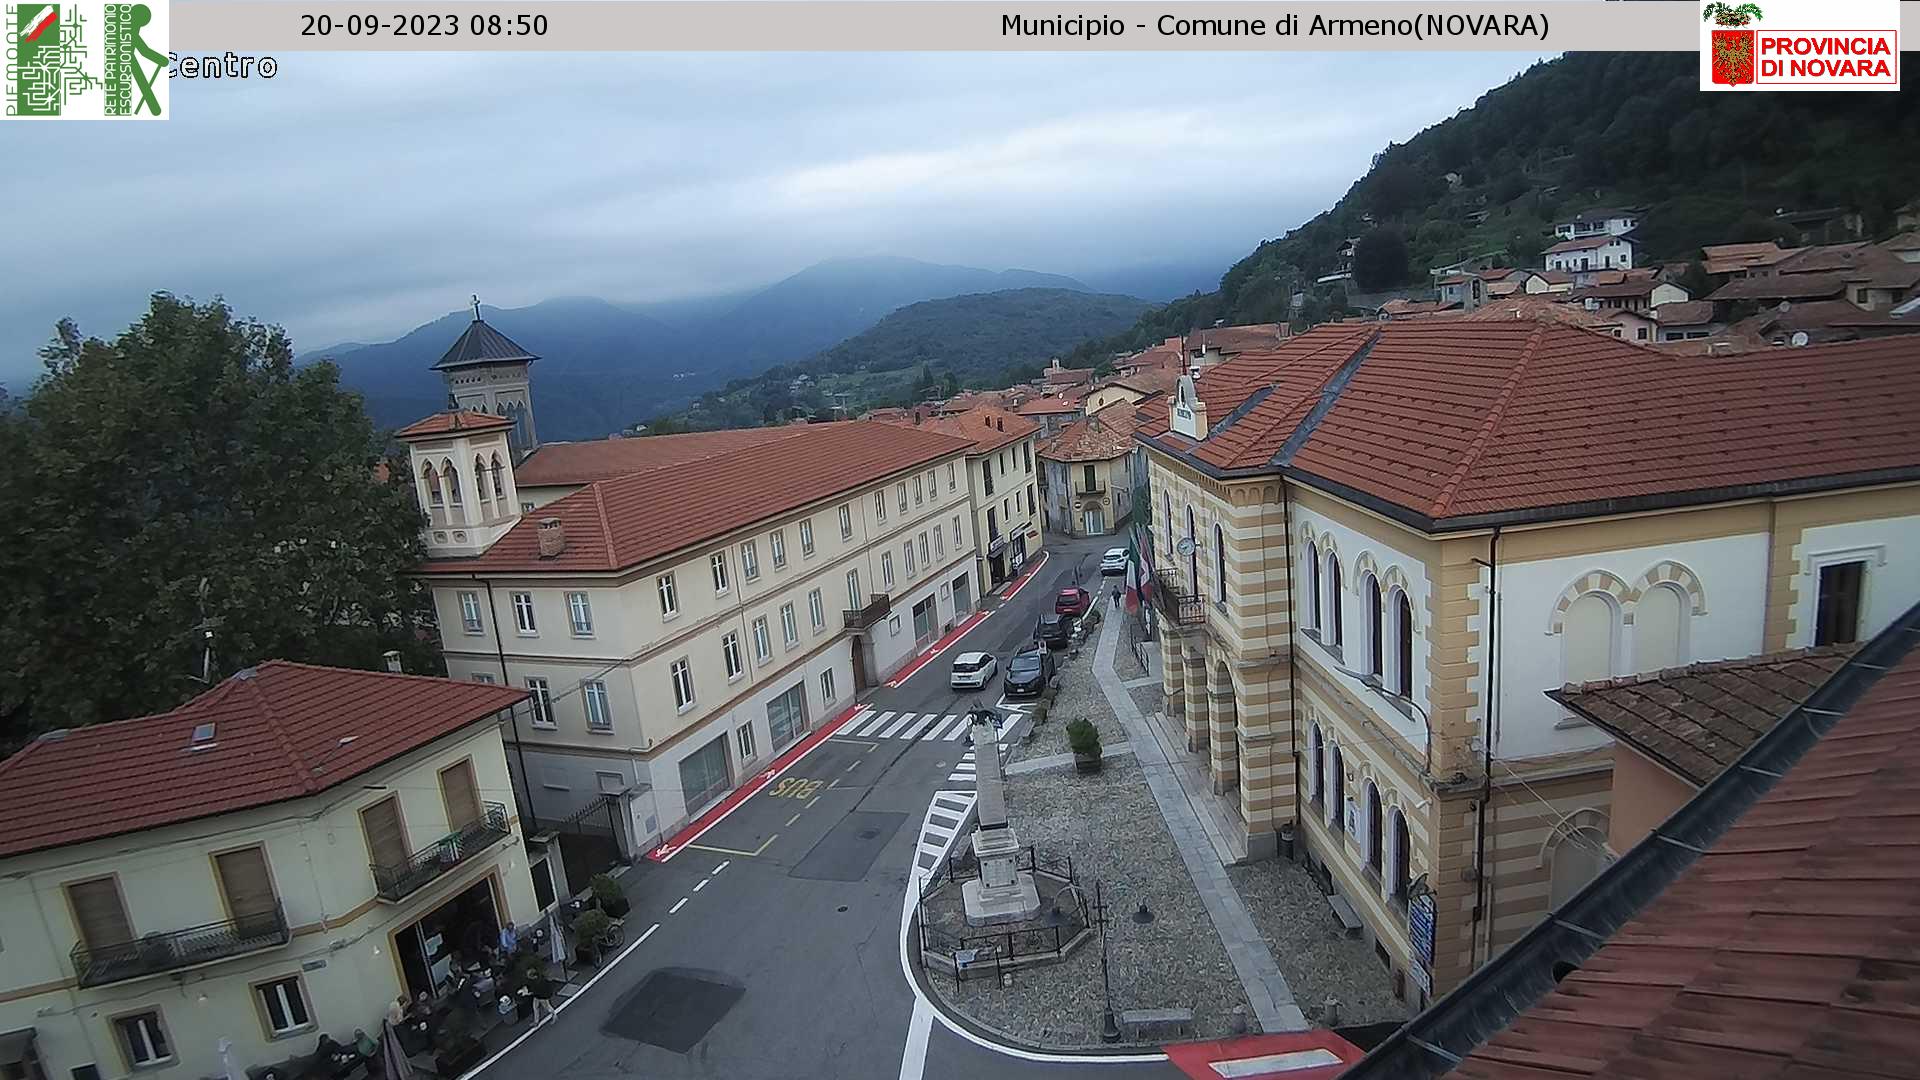 Live from Armeno!  Click for larger images